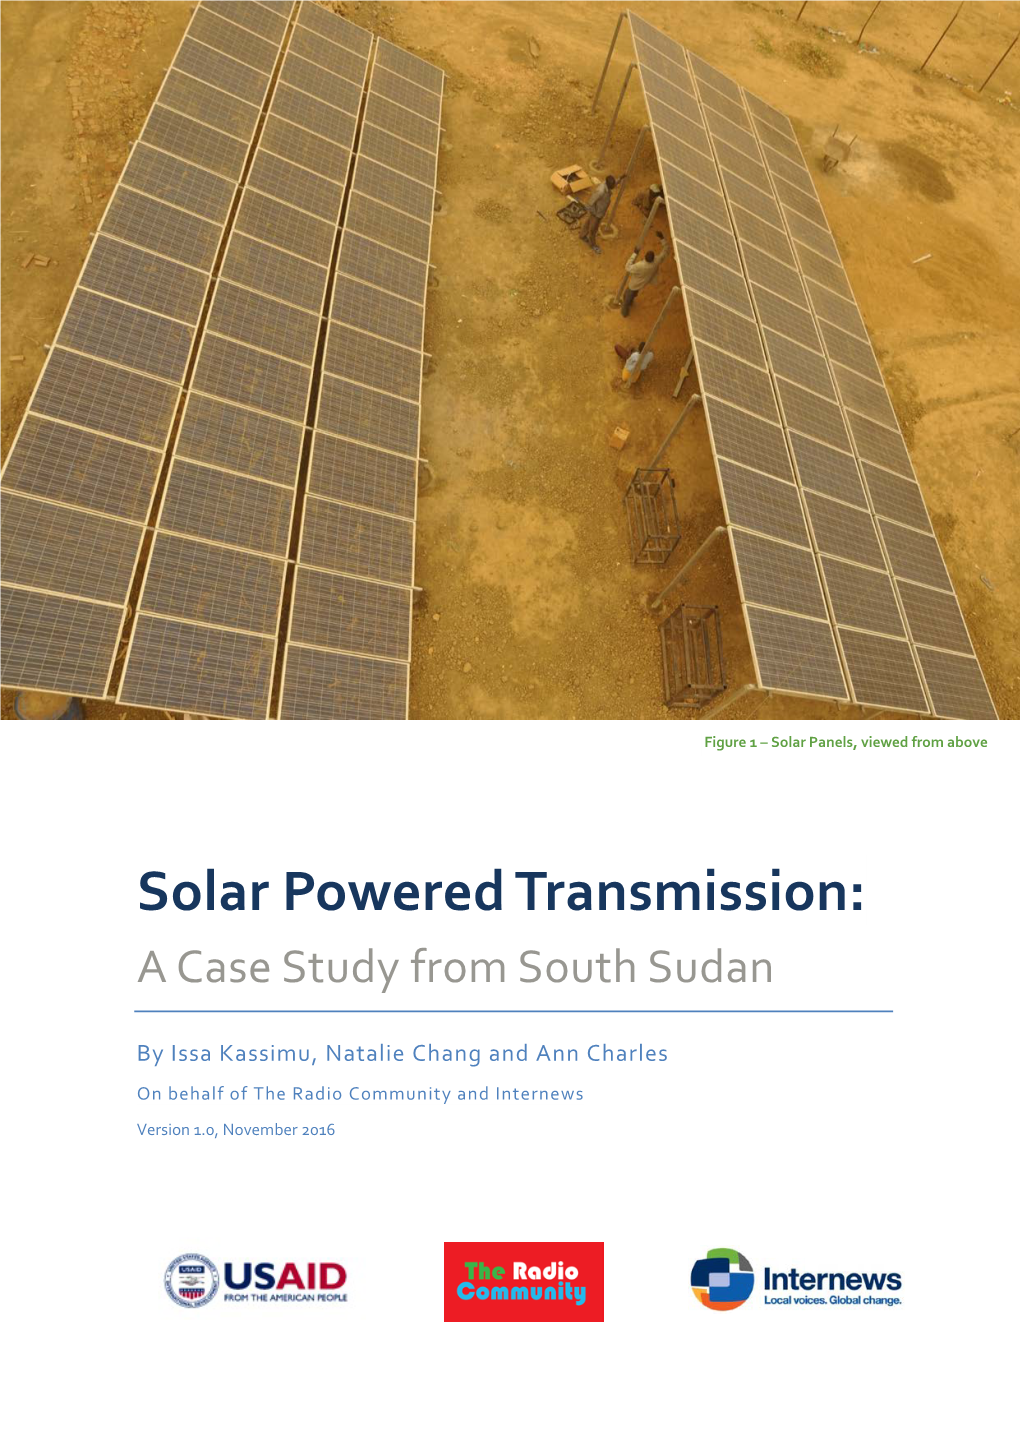 Solar Powered Transmission: a Case Study from South Sudan